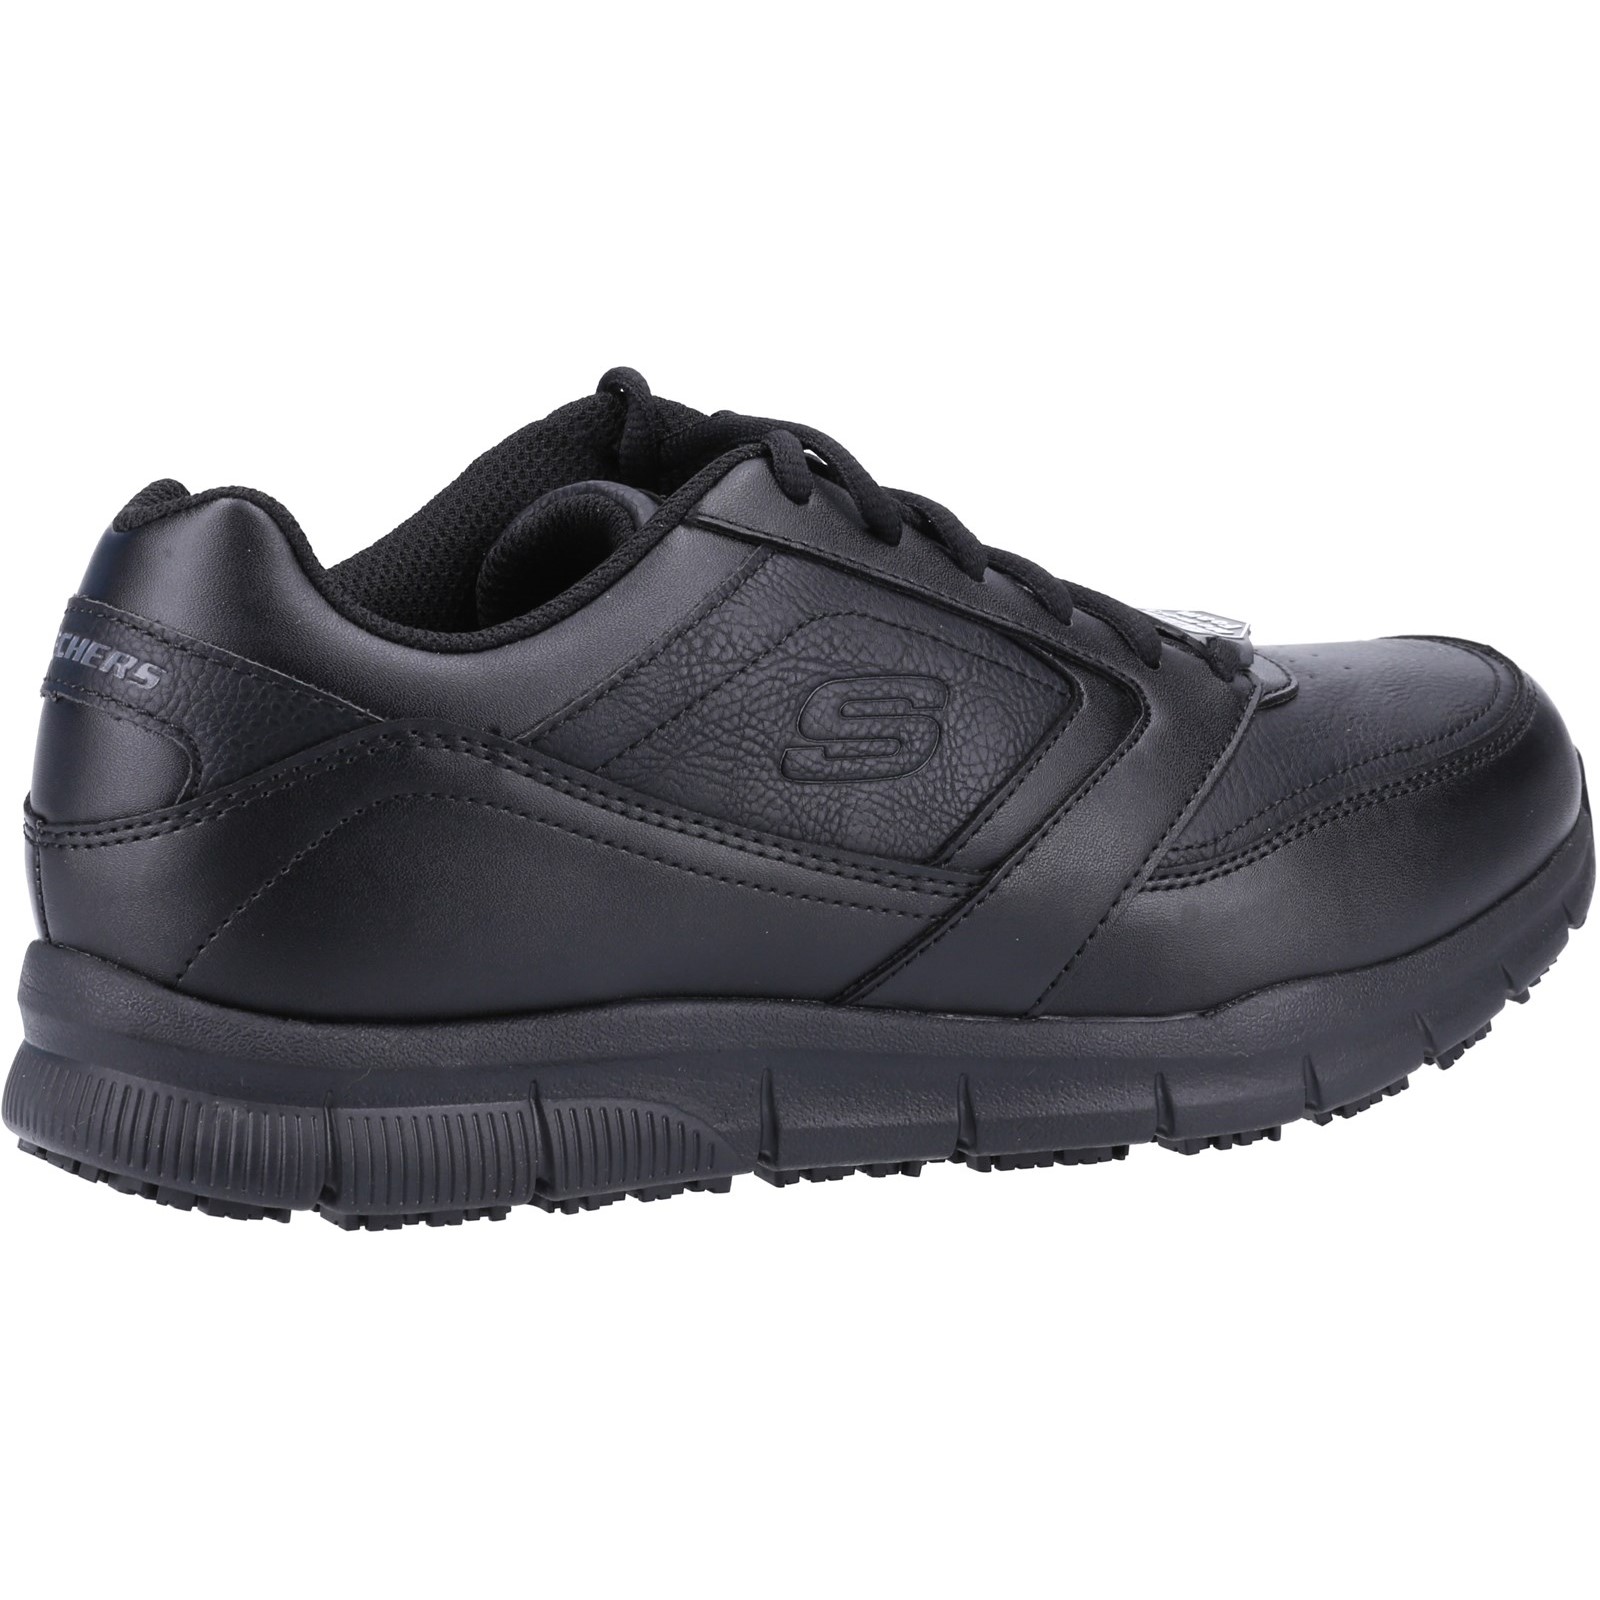 Nampa Occupational Shoes - First Safety